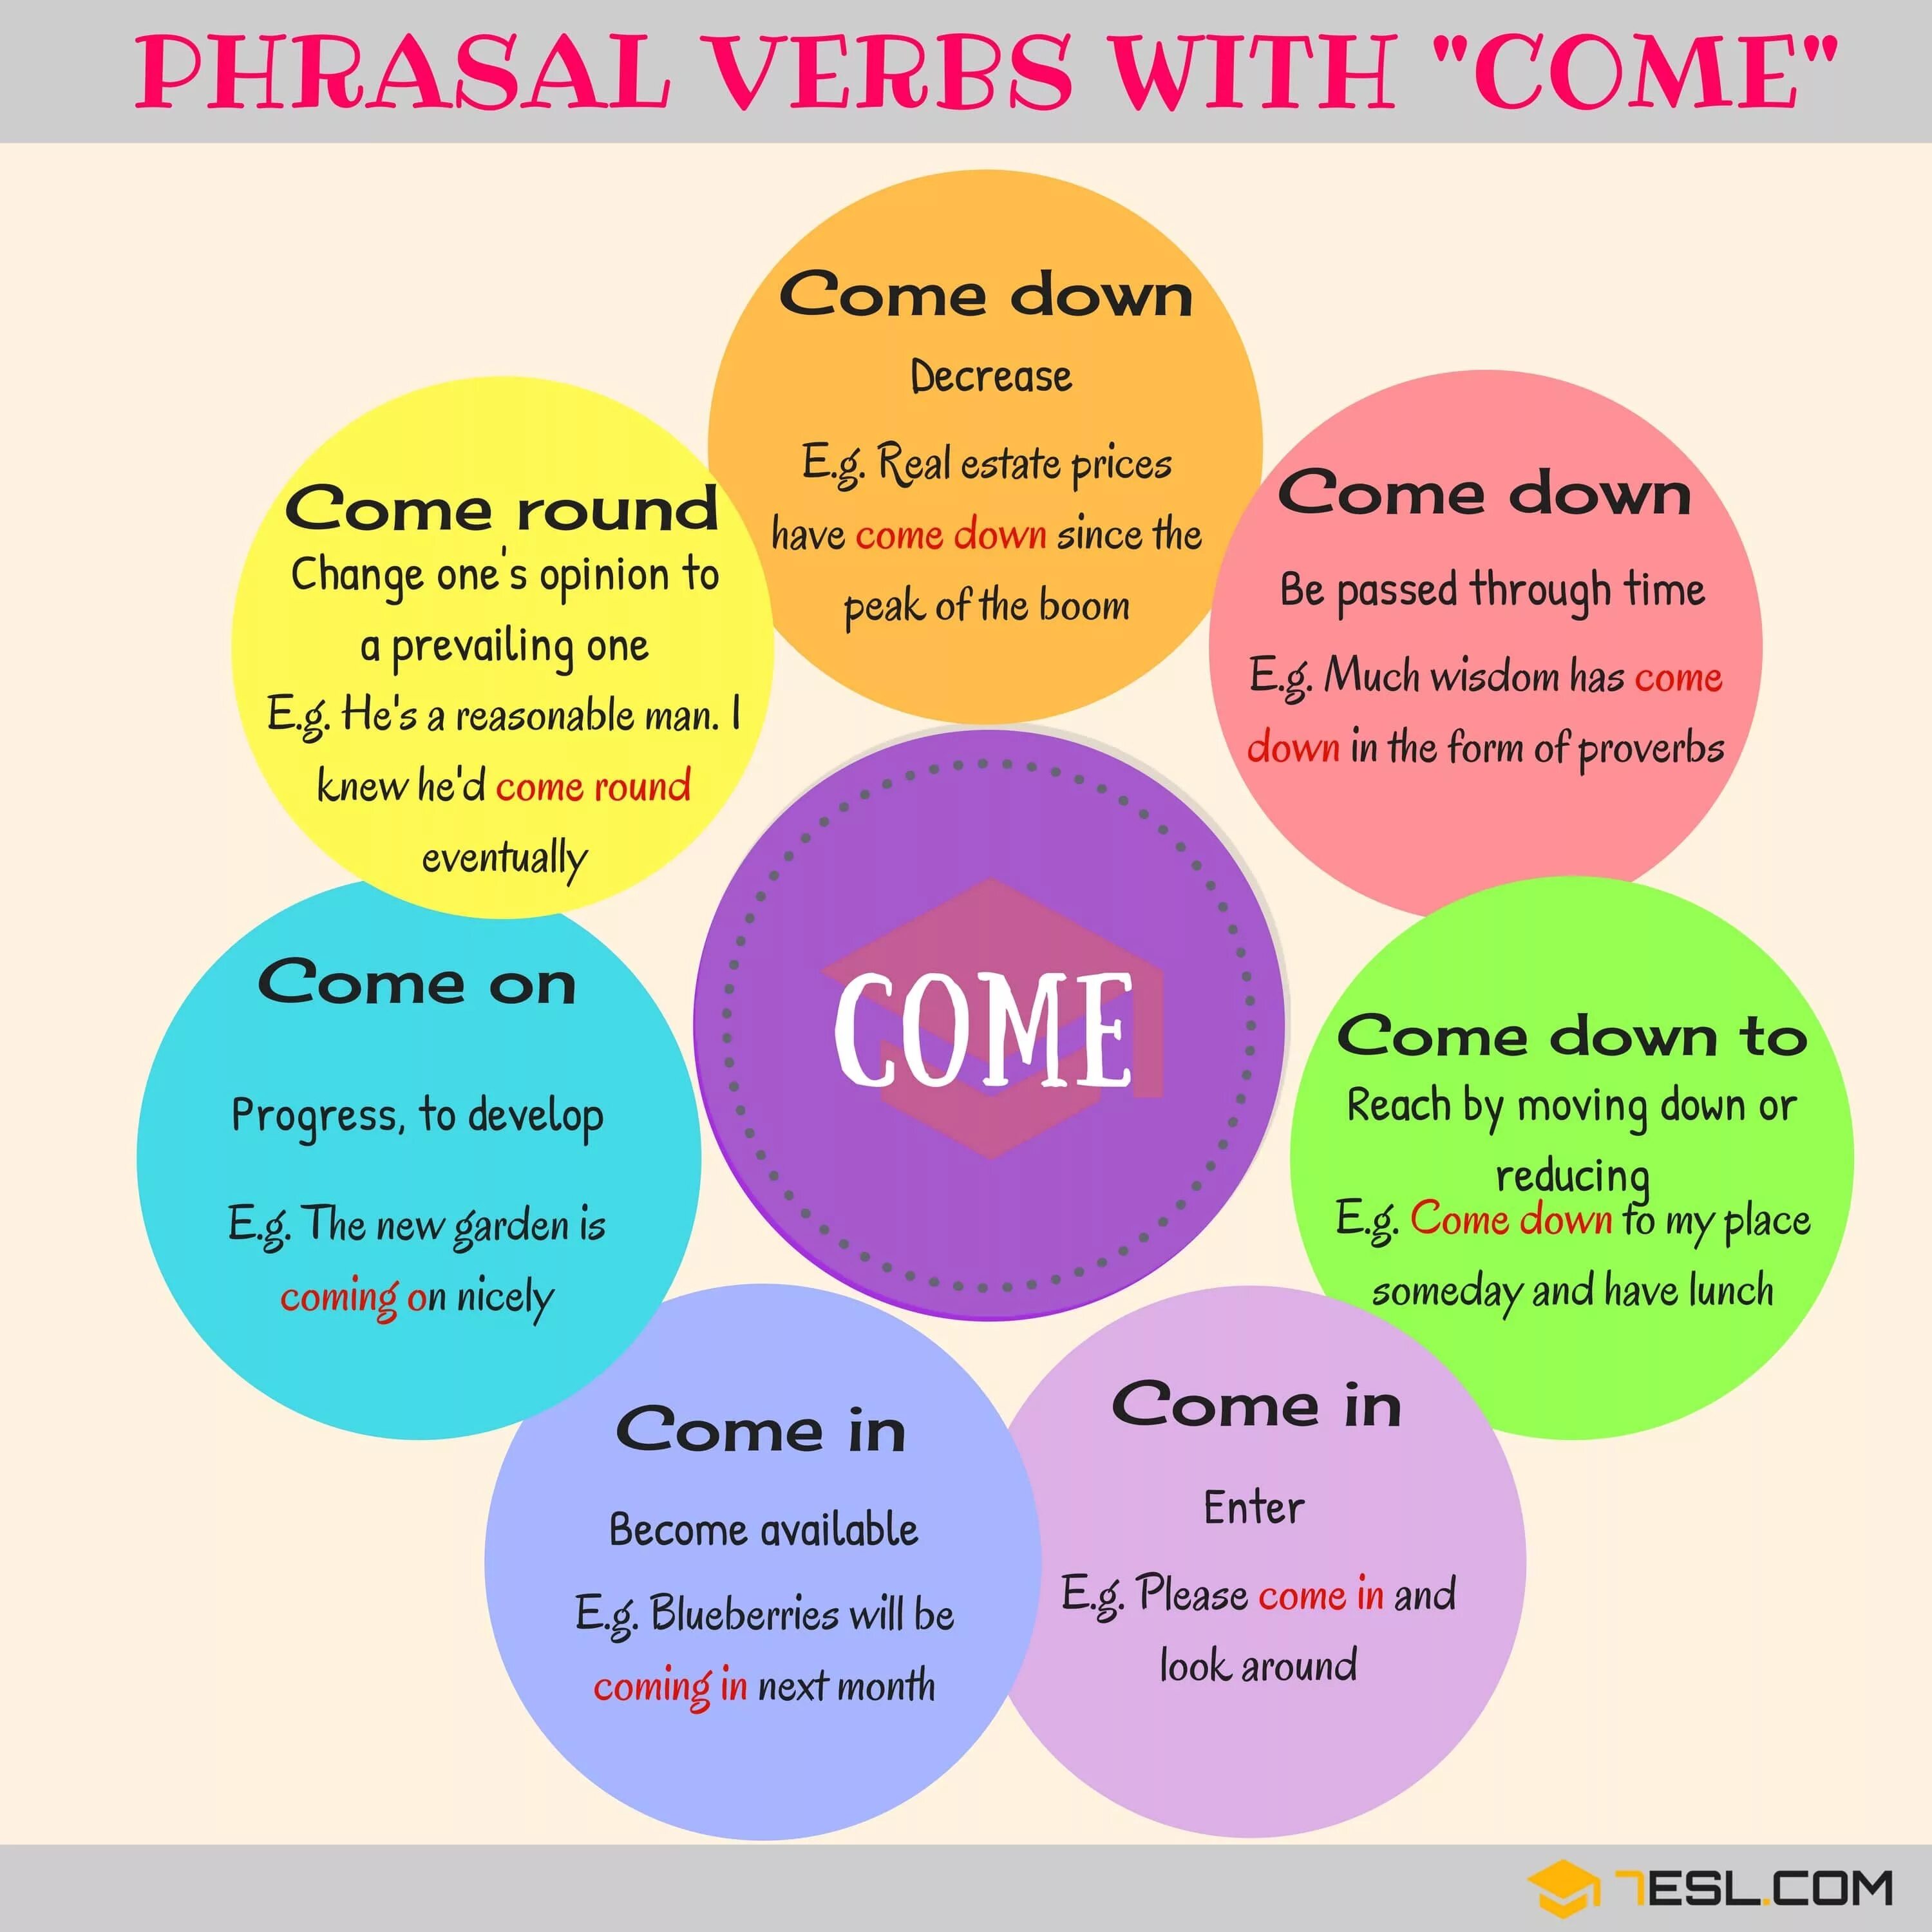 Reply back. Phrasal verb come. Фразовый глагол to come. Phrasal verbs в английском языке come. Come with Фразовый глагол.